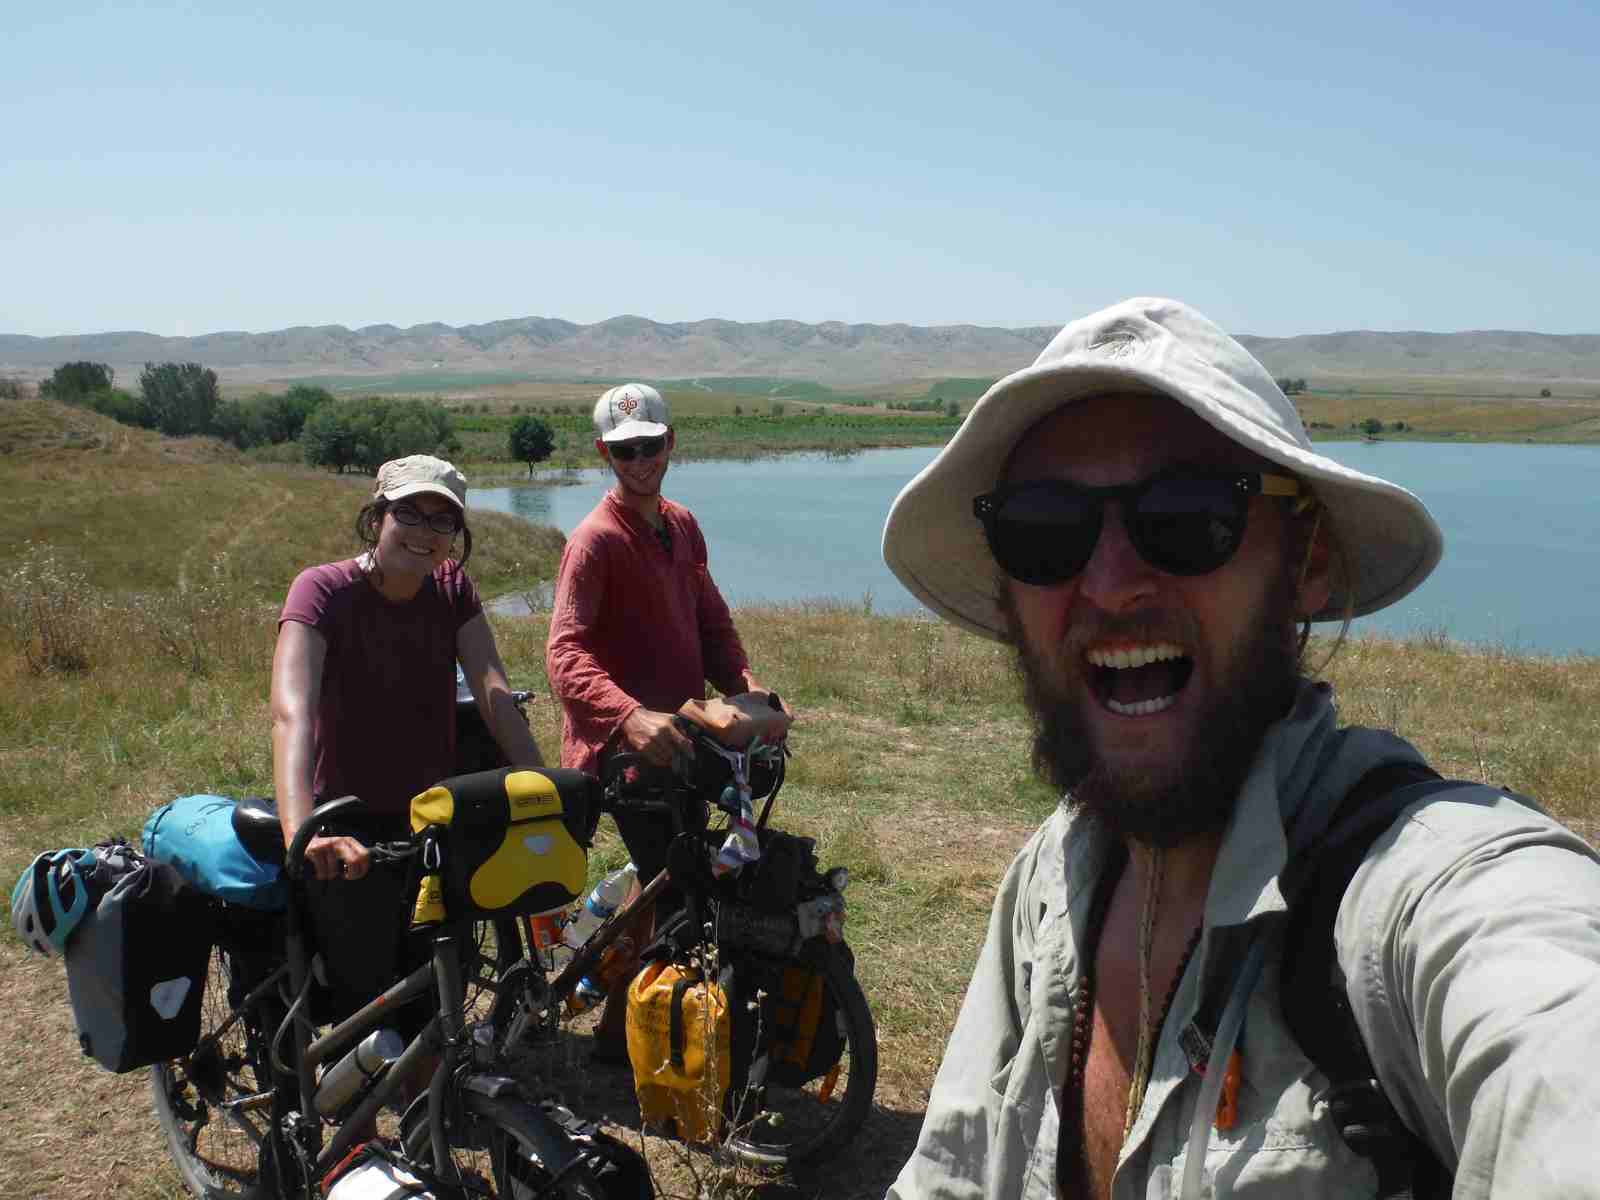 meeting cycle tourist in central asia on the M41